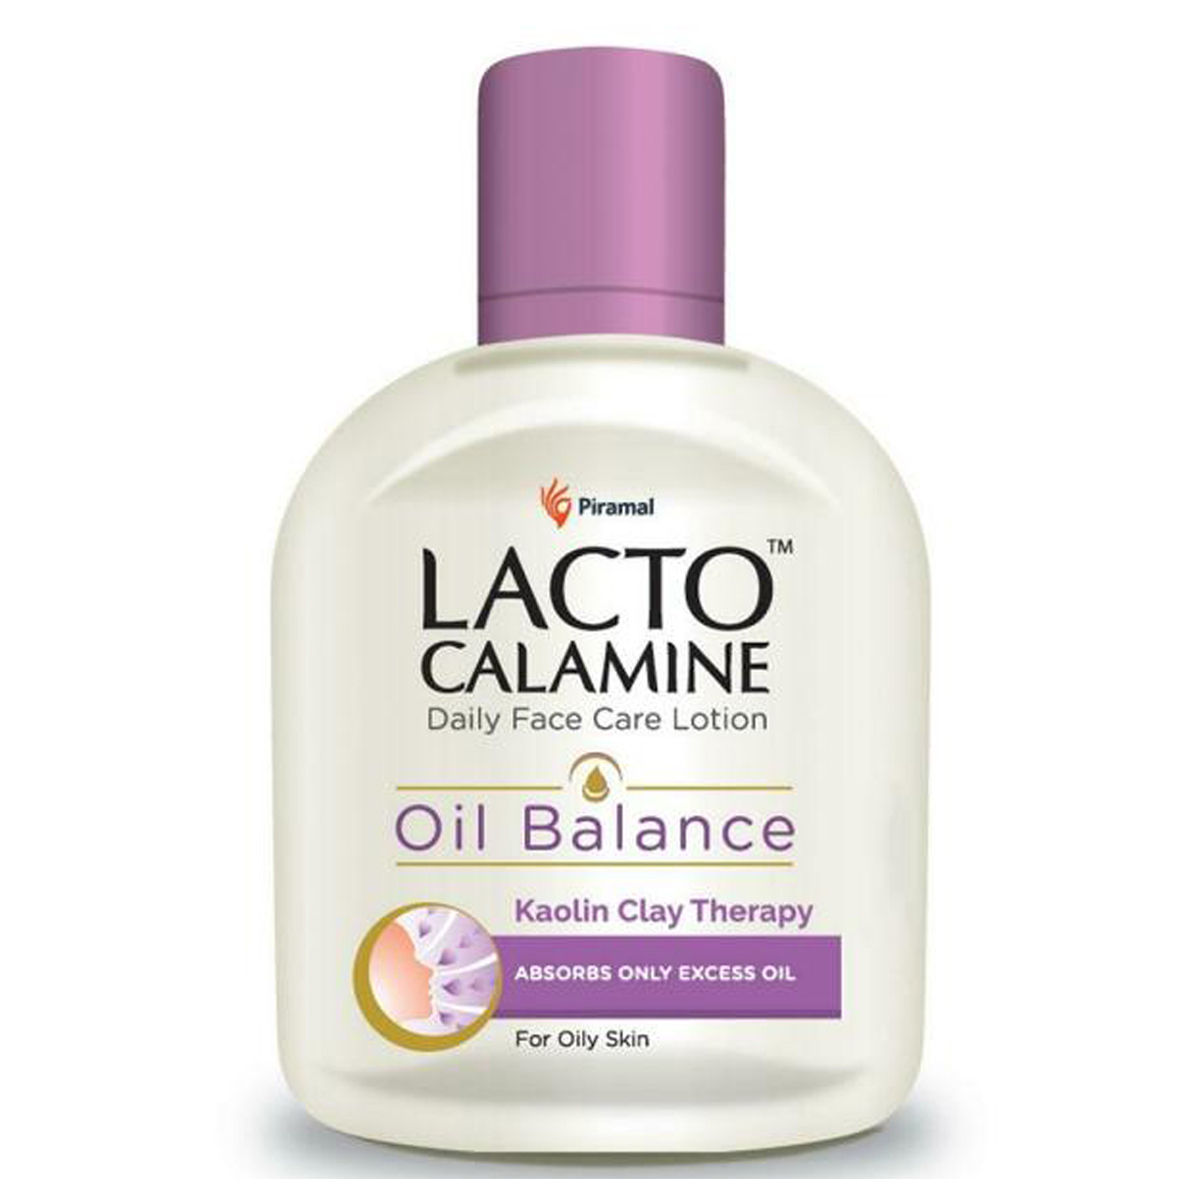 Buy Lacto Calamine Oil Balance Daily Face Care Lotion for Oily Skin, 30 ml Online